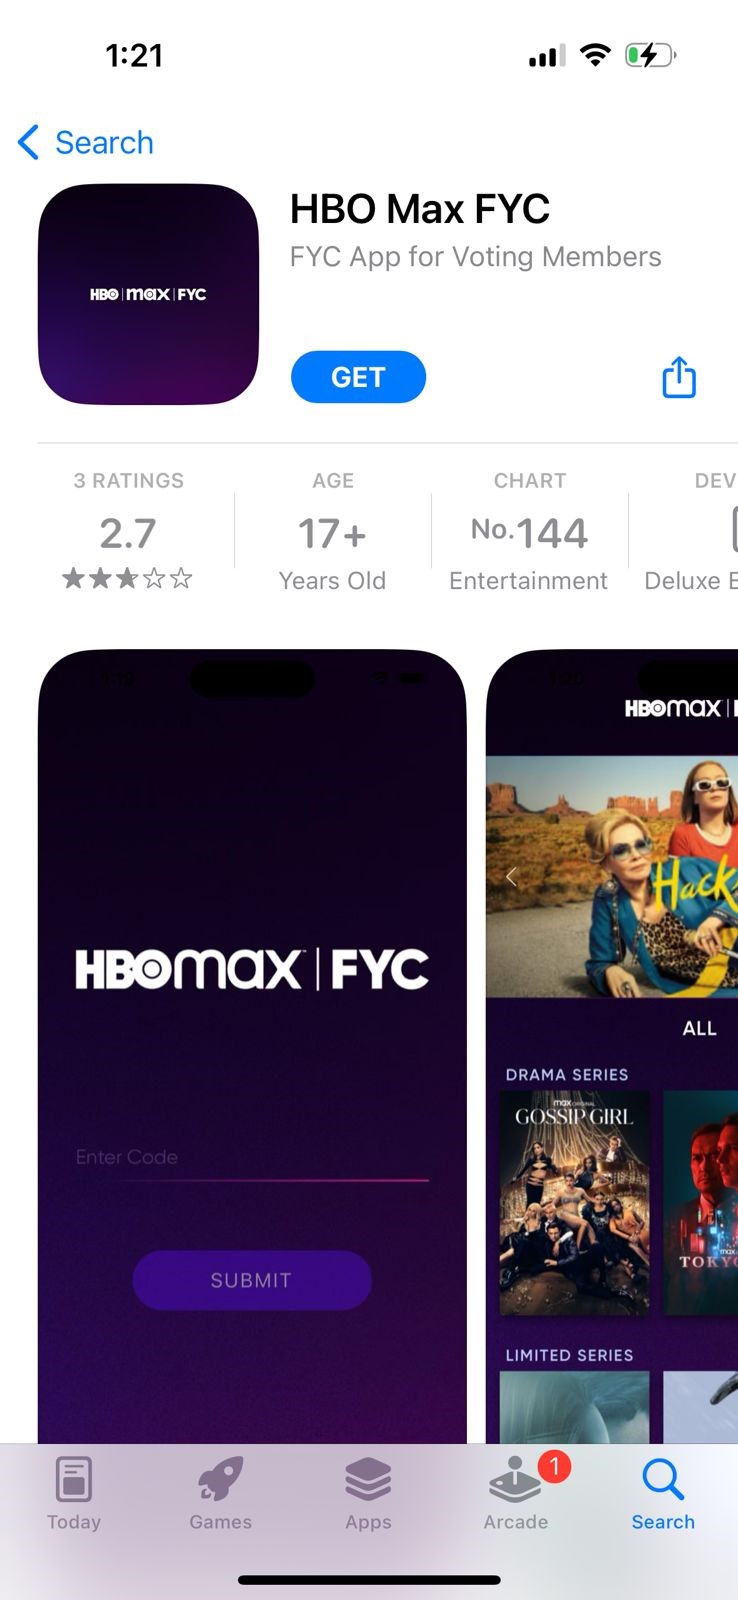 Download the HBO Max app and install it on your device